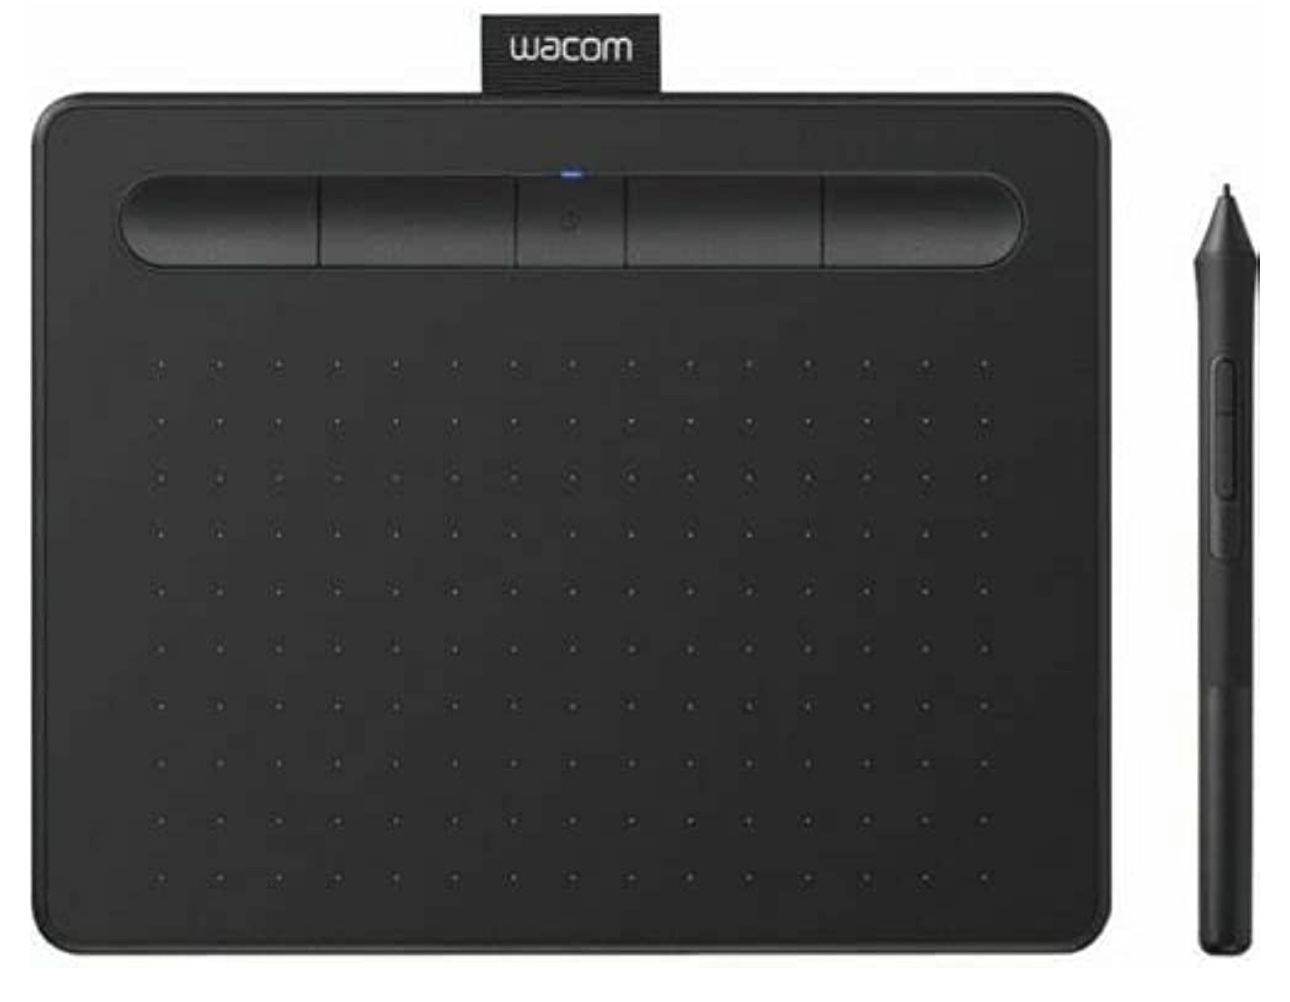 Wacom Intuos Creative Pen Tablet for Graphics - Small, Black bluetooth wireless